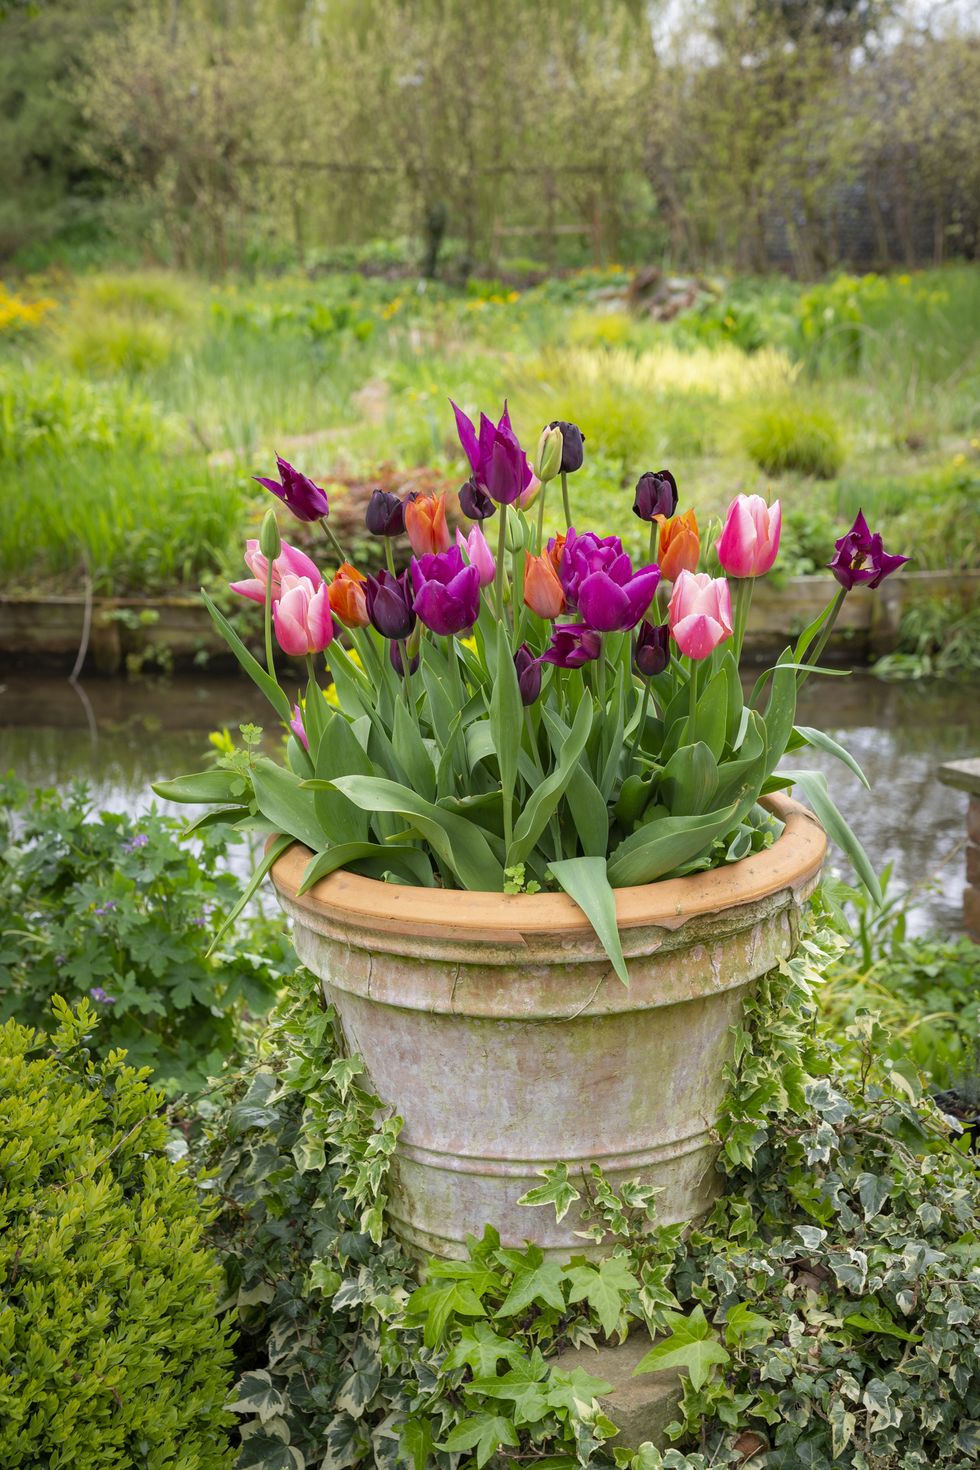 terracotta pot with a mixture of colourful tulips flowering in late april in an english garden